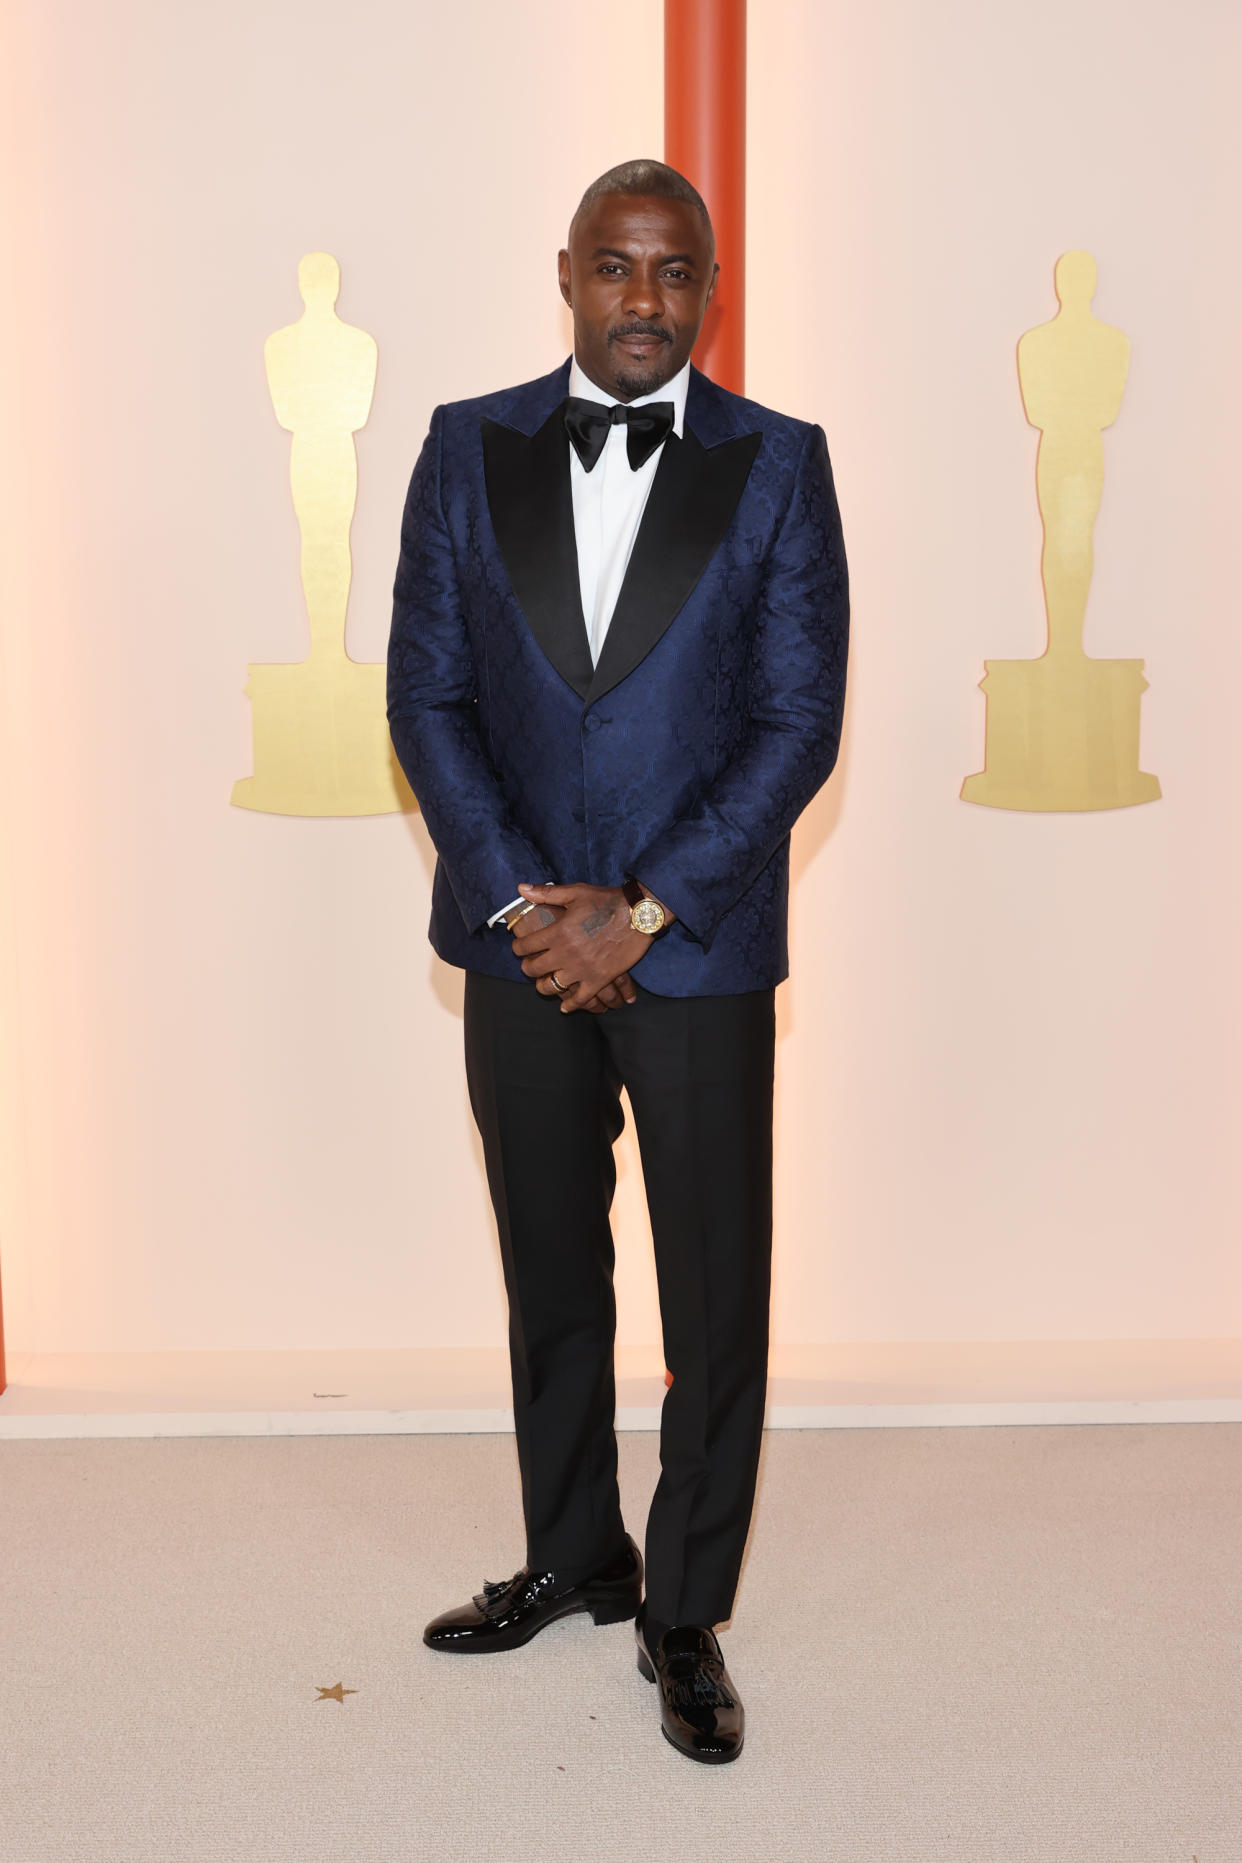 THE OSCARS&#xae; - The 95th Oscars&#xae; will air live from the Dolby&#xae; Theatre at Ovation Hollywood on ABC and broadcast outlets worldwide on Sunday, March 12, 2023, at 8 p.m. EDT/5 p.m. PDT. (ABC)
IDRIS ELBA